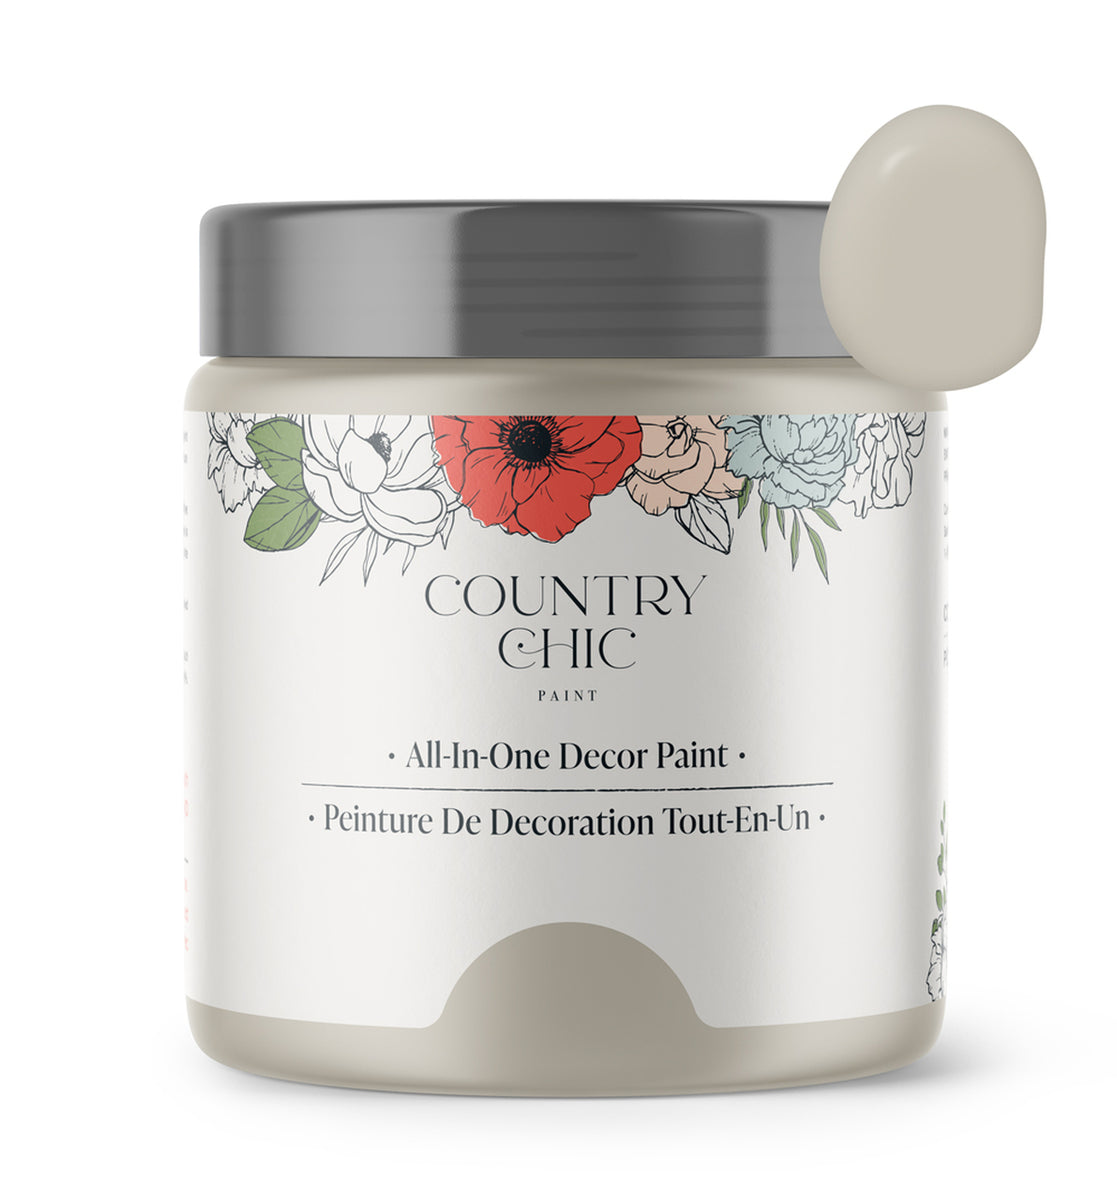 Color Inspiration for Pop the Bubbly - Country Chic Paint